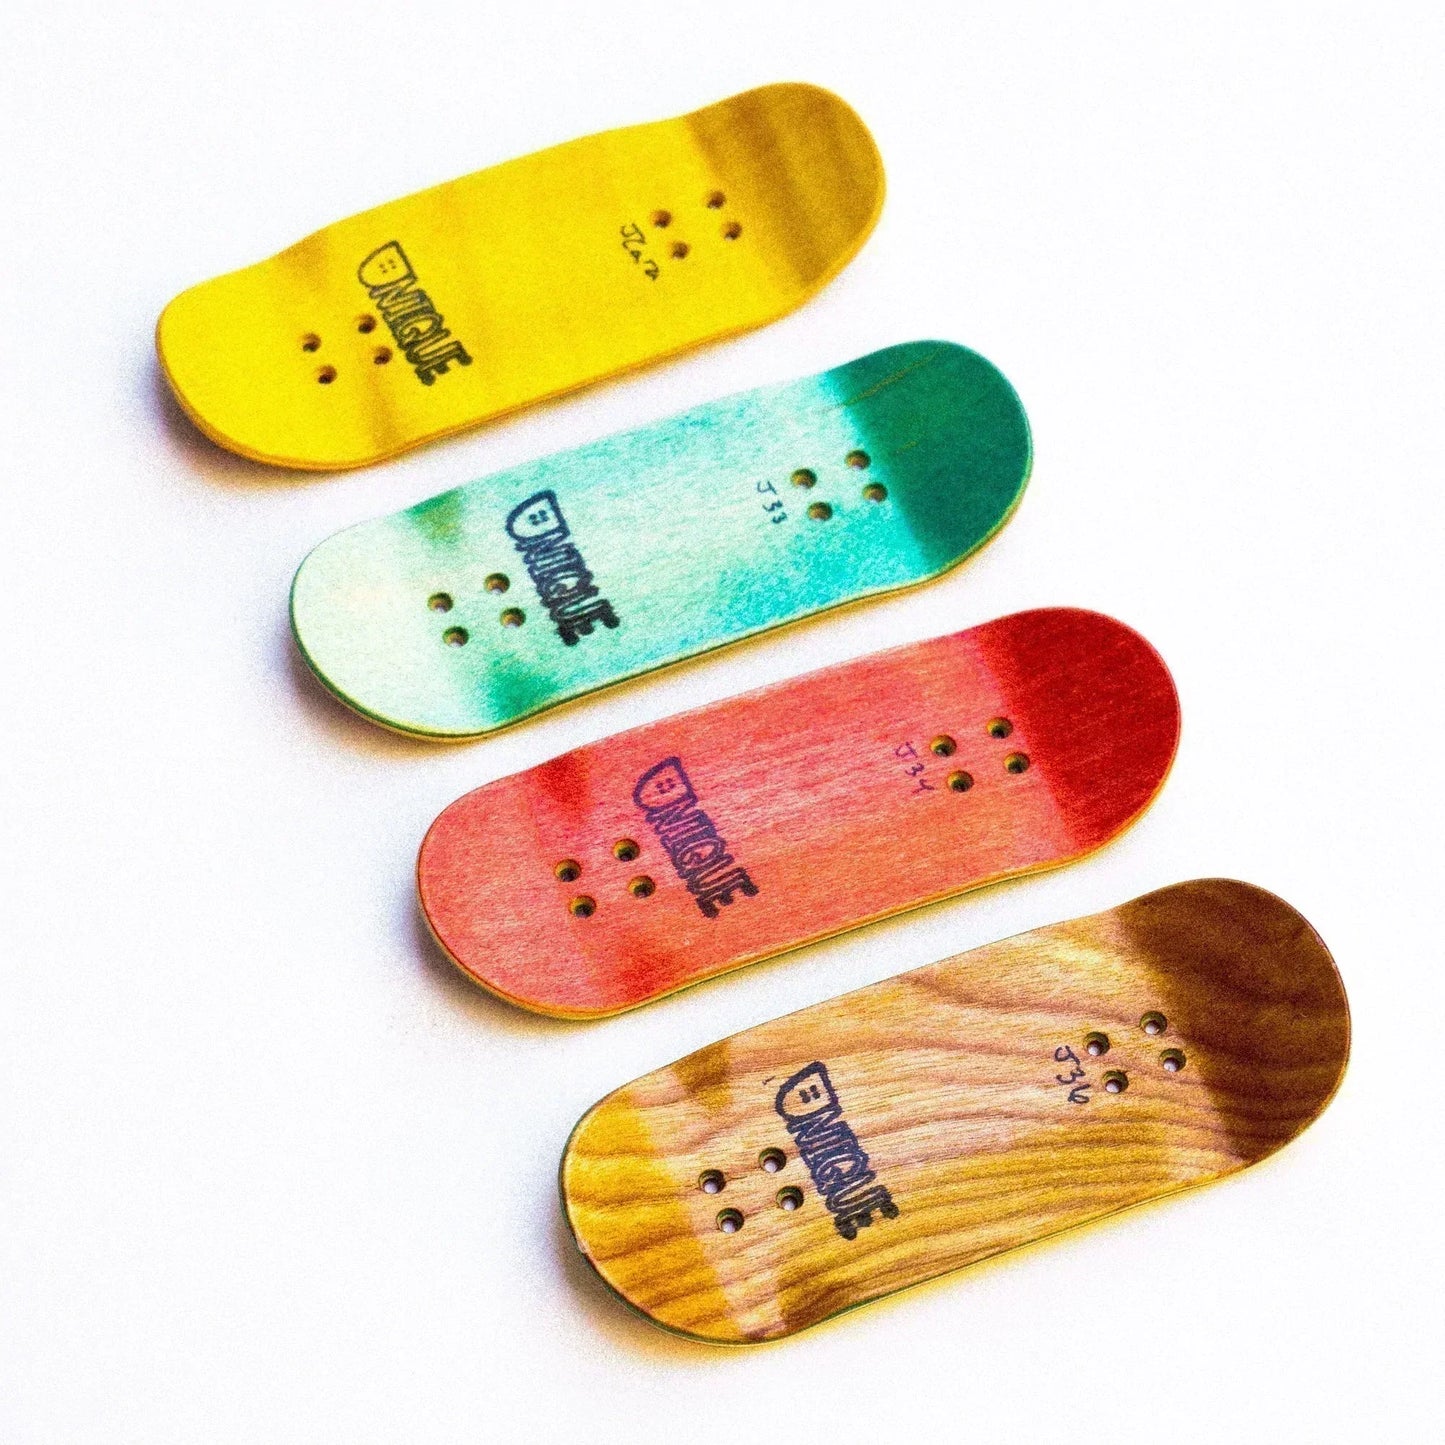 Hand Shaped 26mm "Loopy Throw" Deck